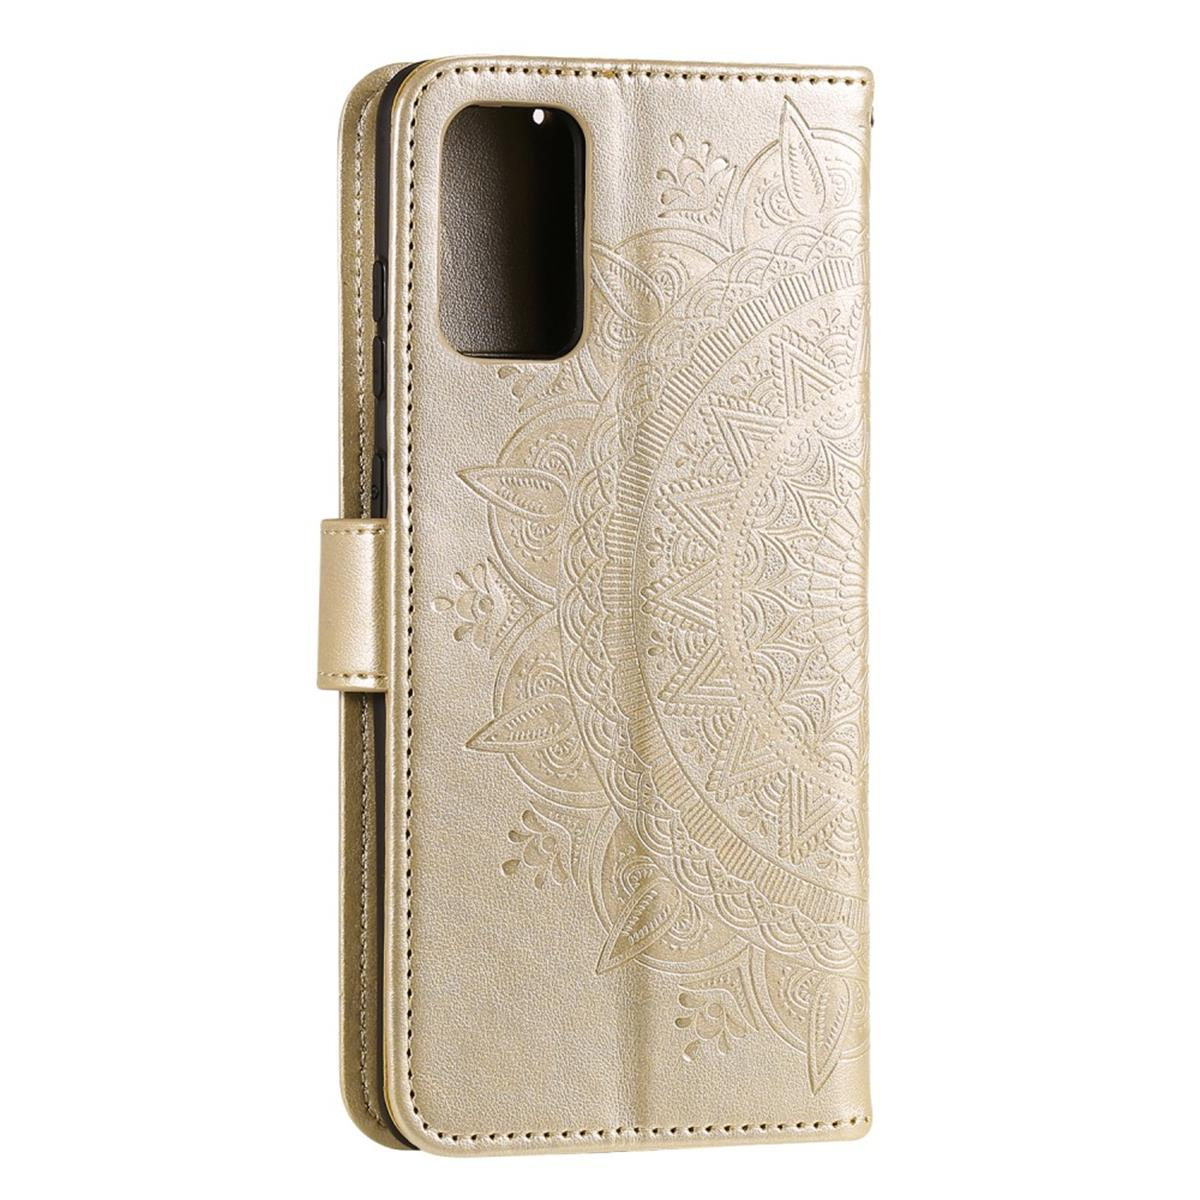 COVERKINGZ Klapphülle mit Gold Muster, Huawei, Bookcover, Y5p, Mandala